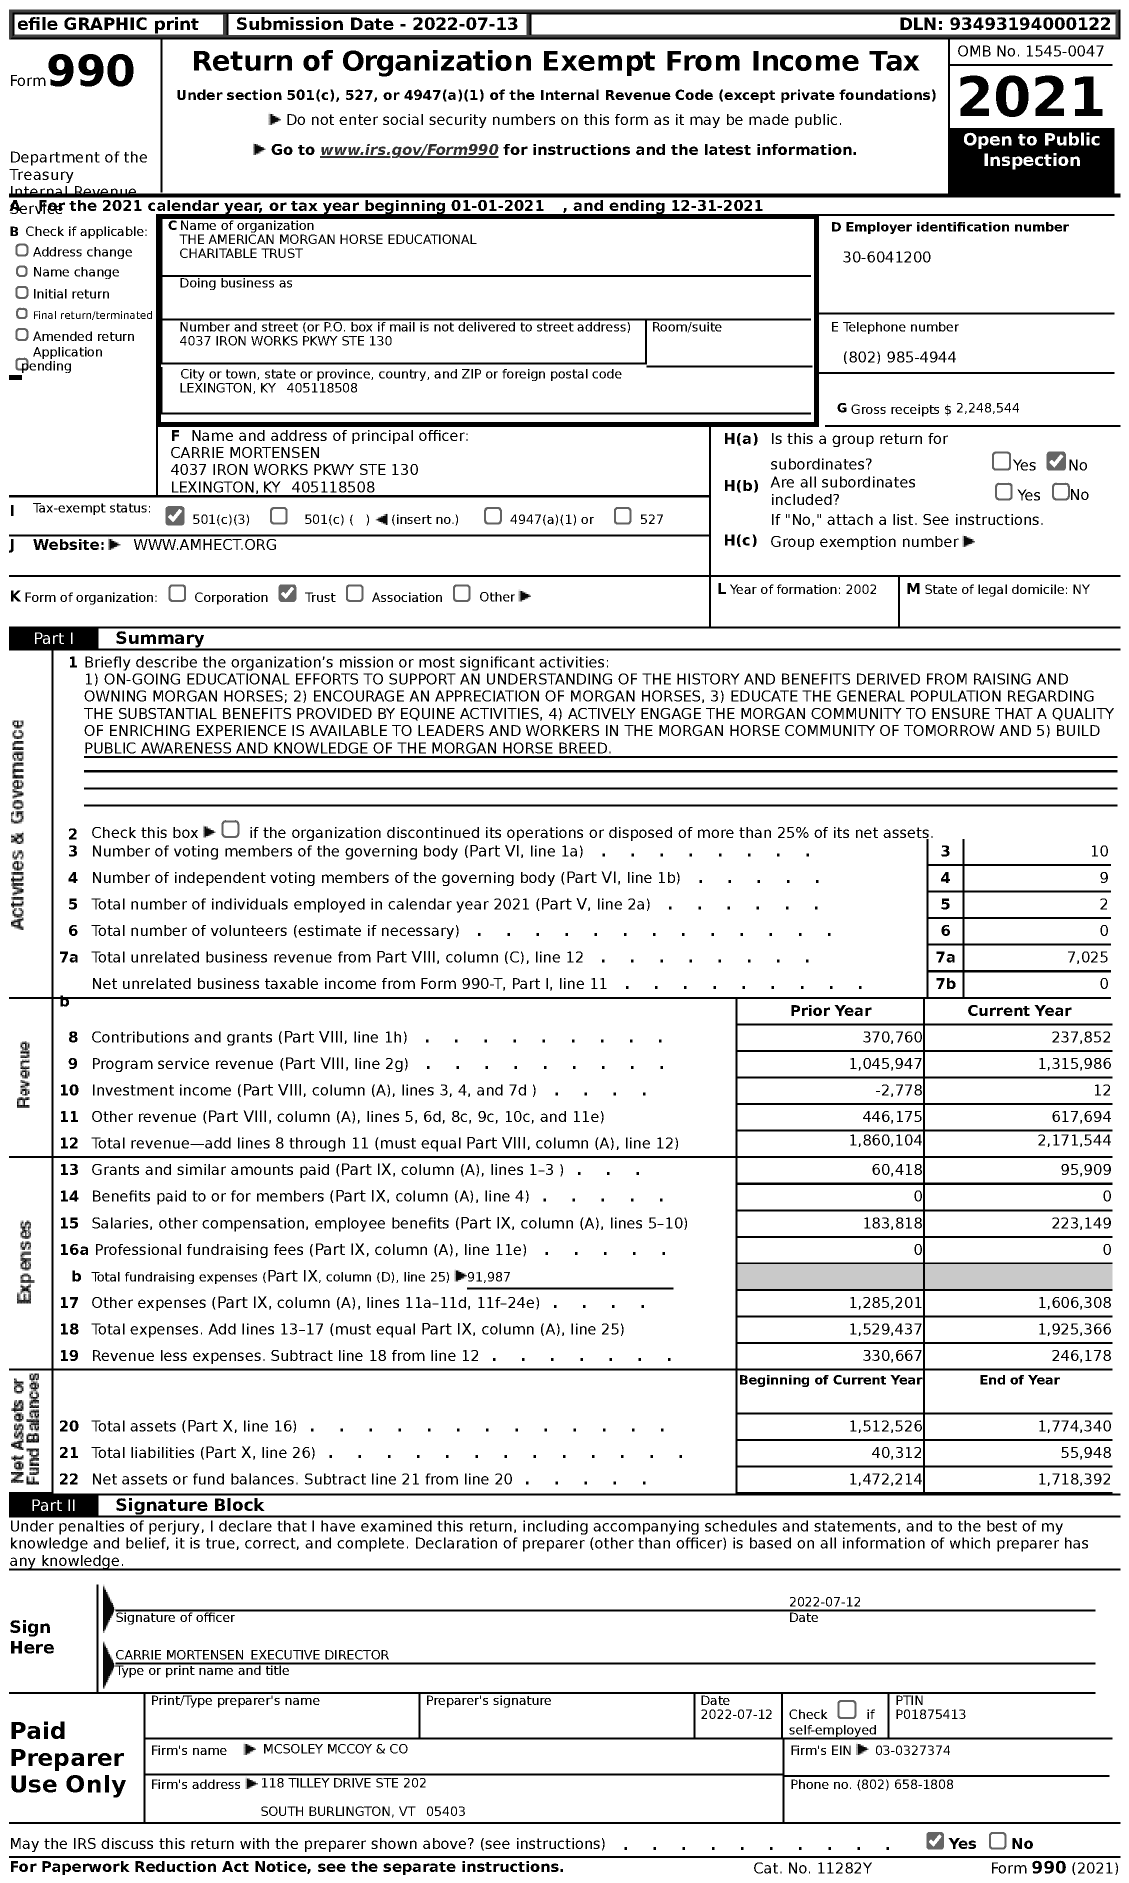 Image of first page of 2021 Form 990 for The American Morgan Horse Educational Charitable Trust